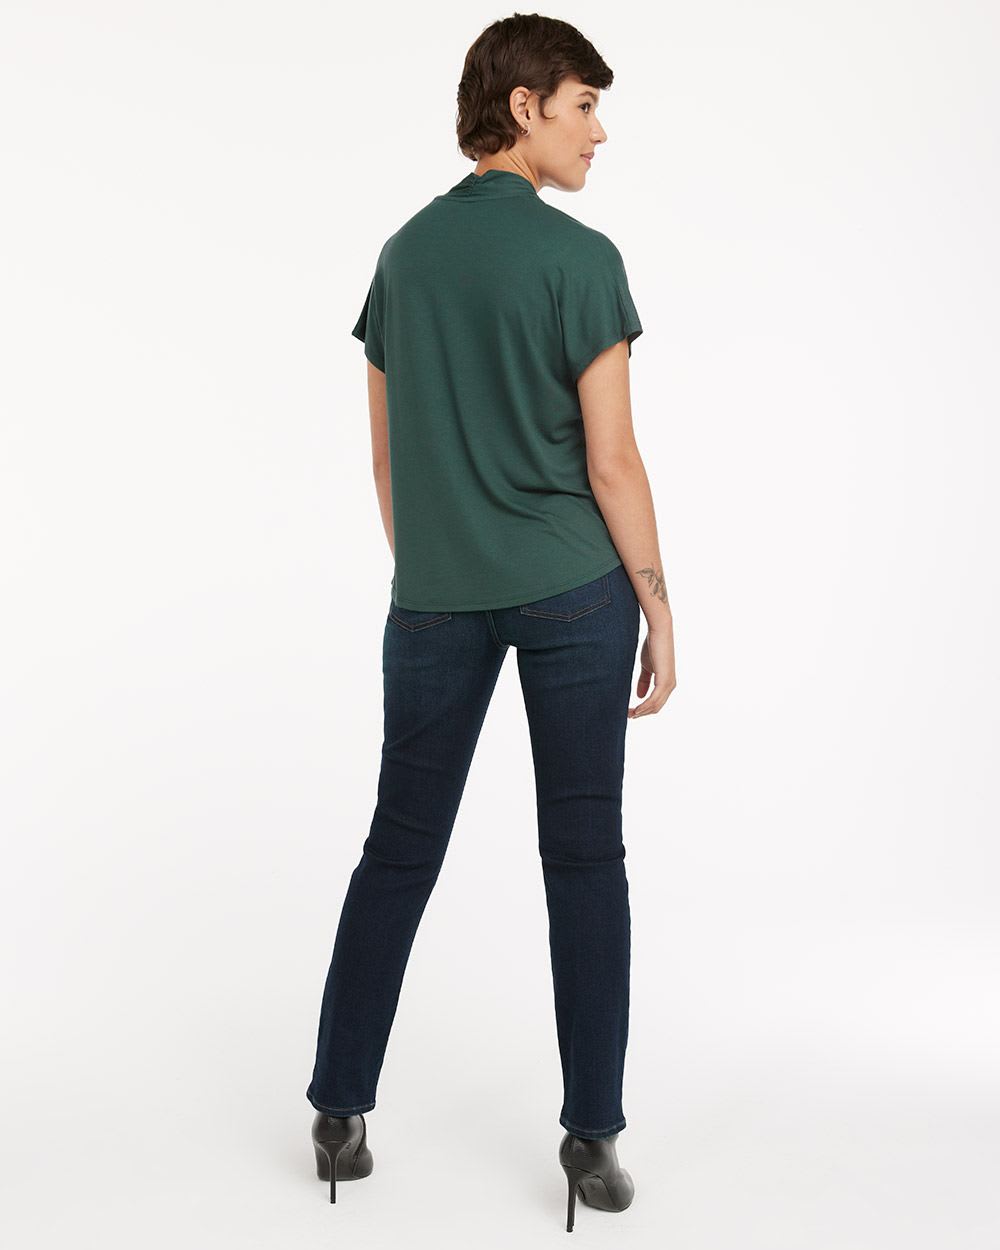 Solid V-Neck Top with Extended Sleeves